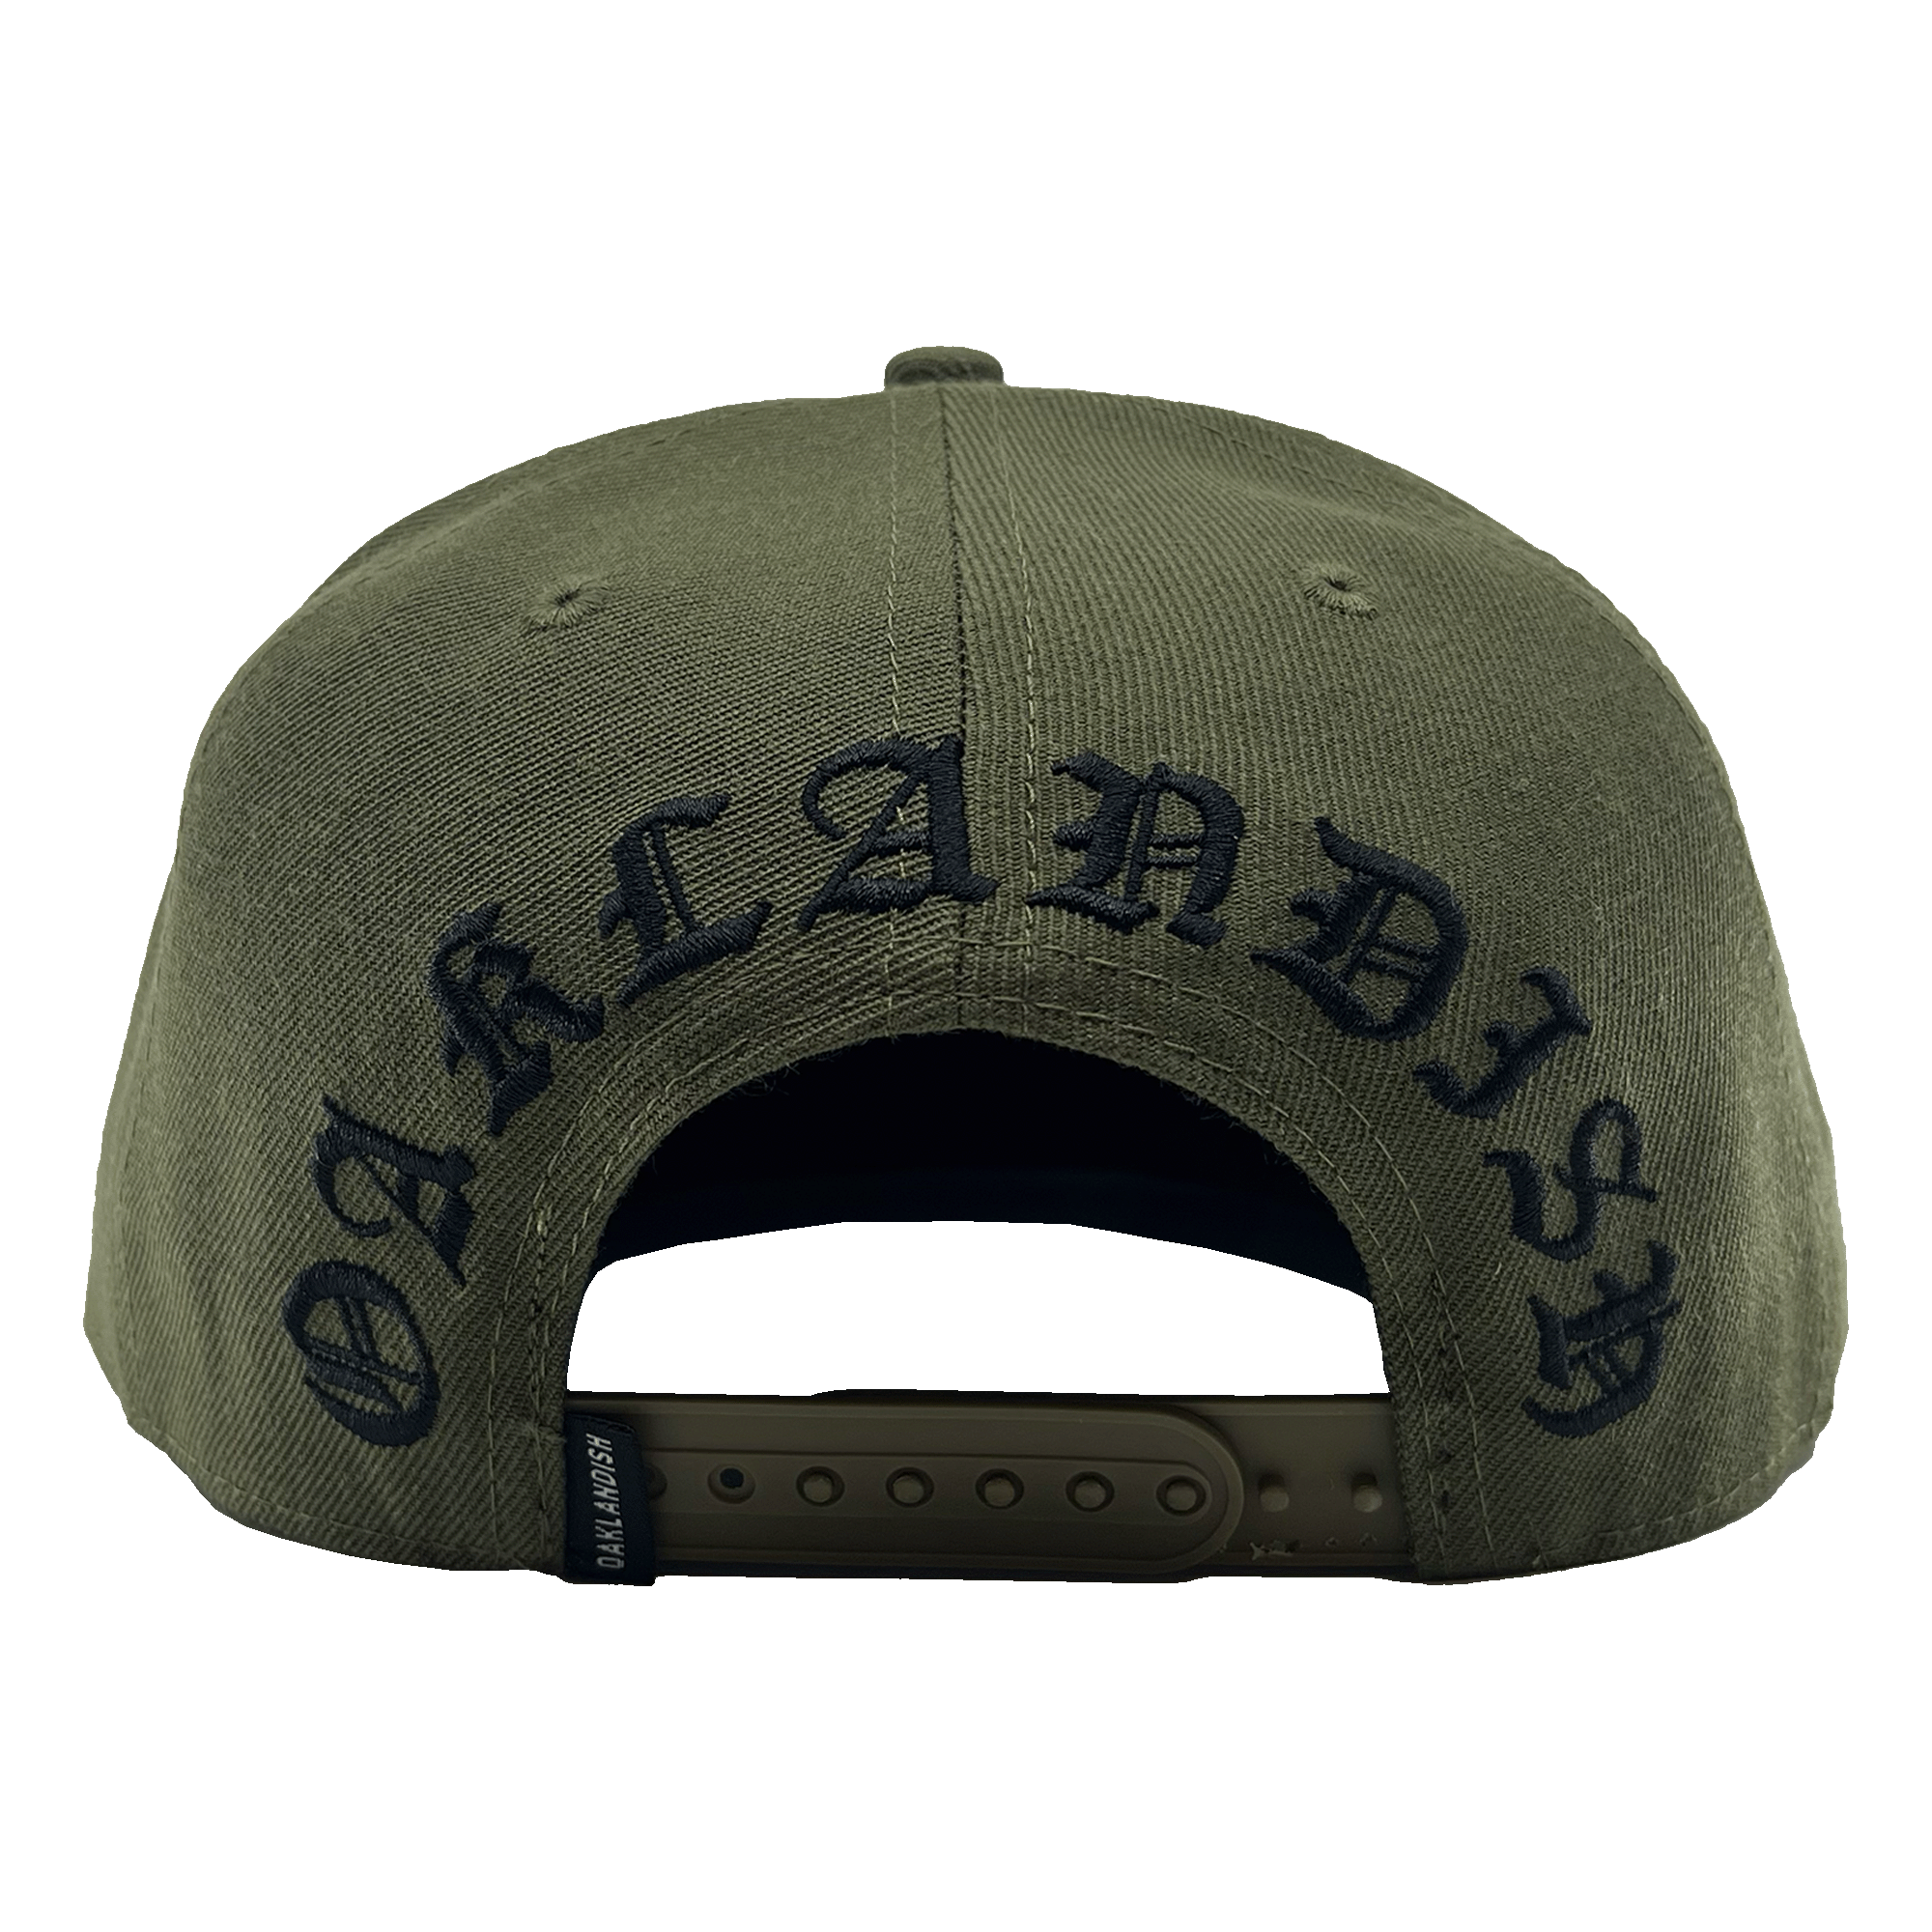 Back view of green hat with snapback closure and small Oaklandish logo with black embroidered Oaklandish wordmark in Old English script.